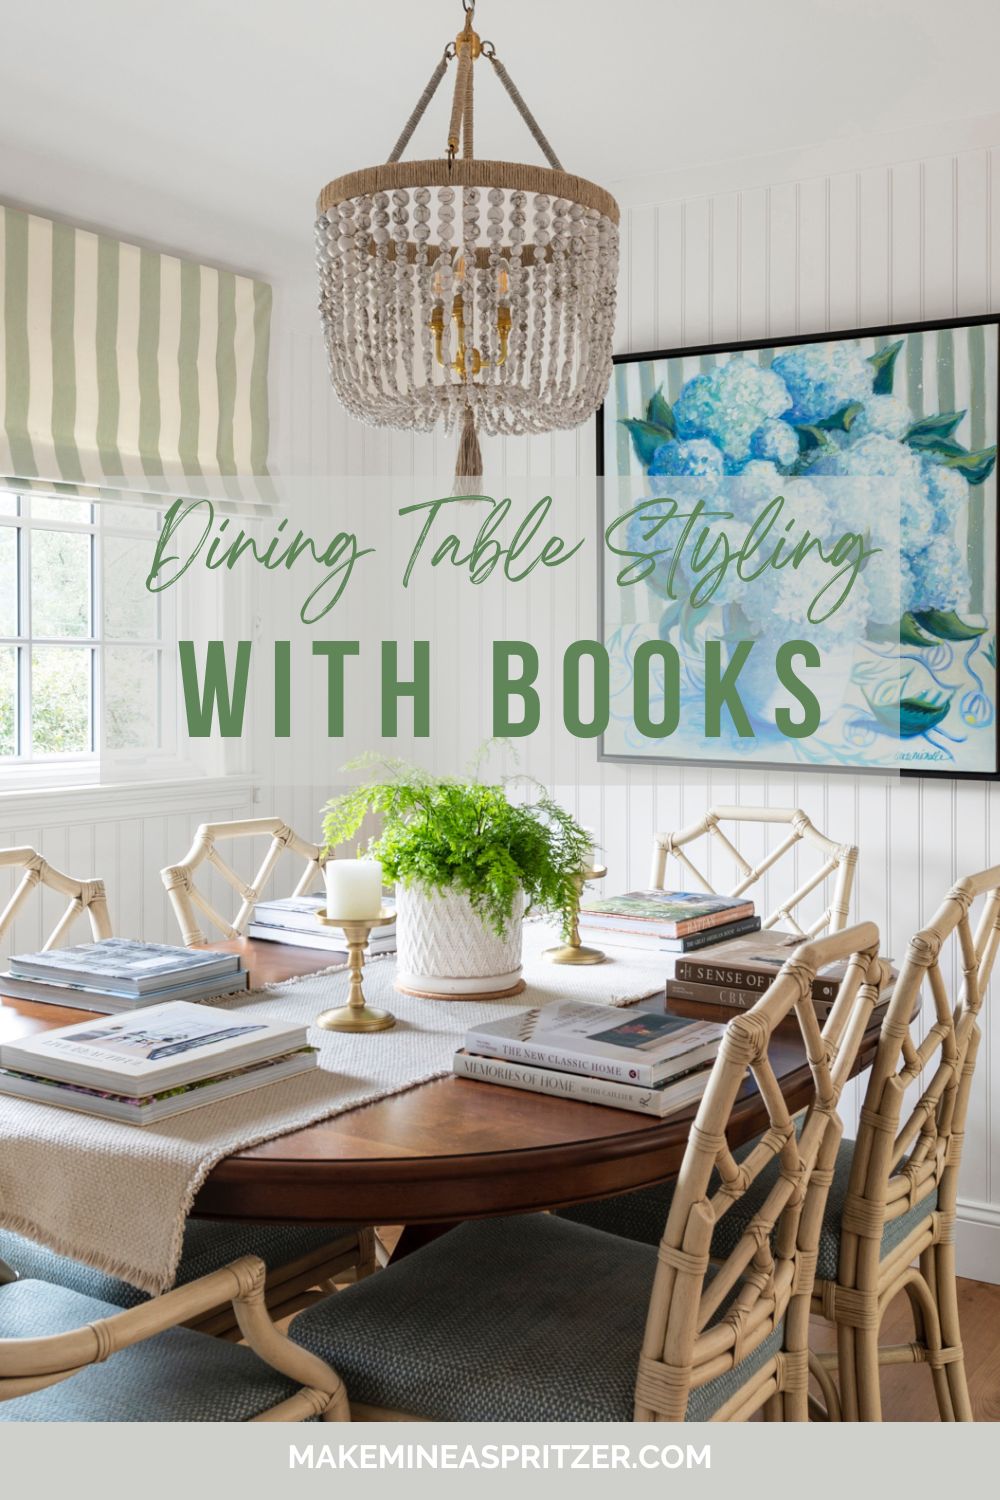 Dining Table Styling With Books Pinterest collage.